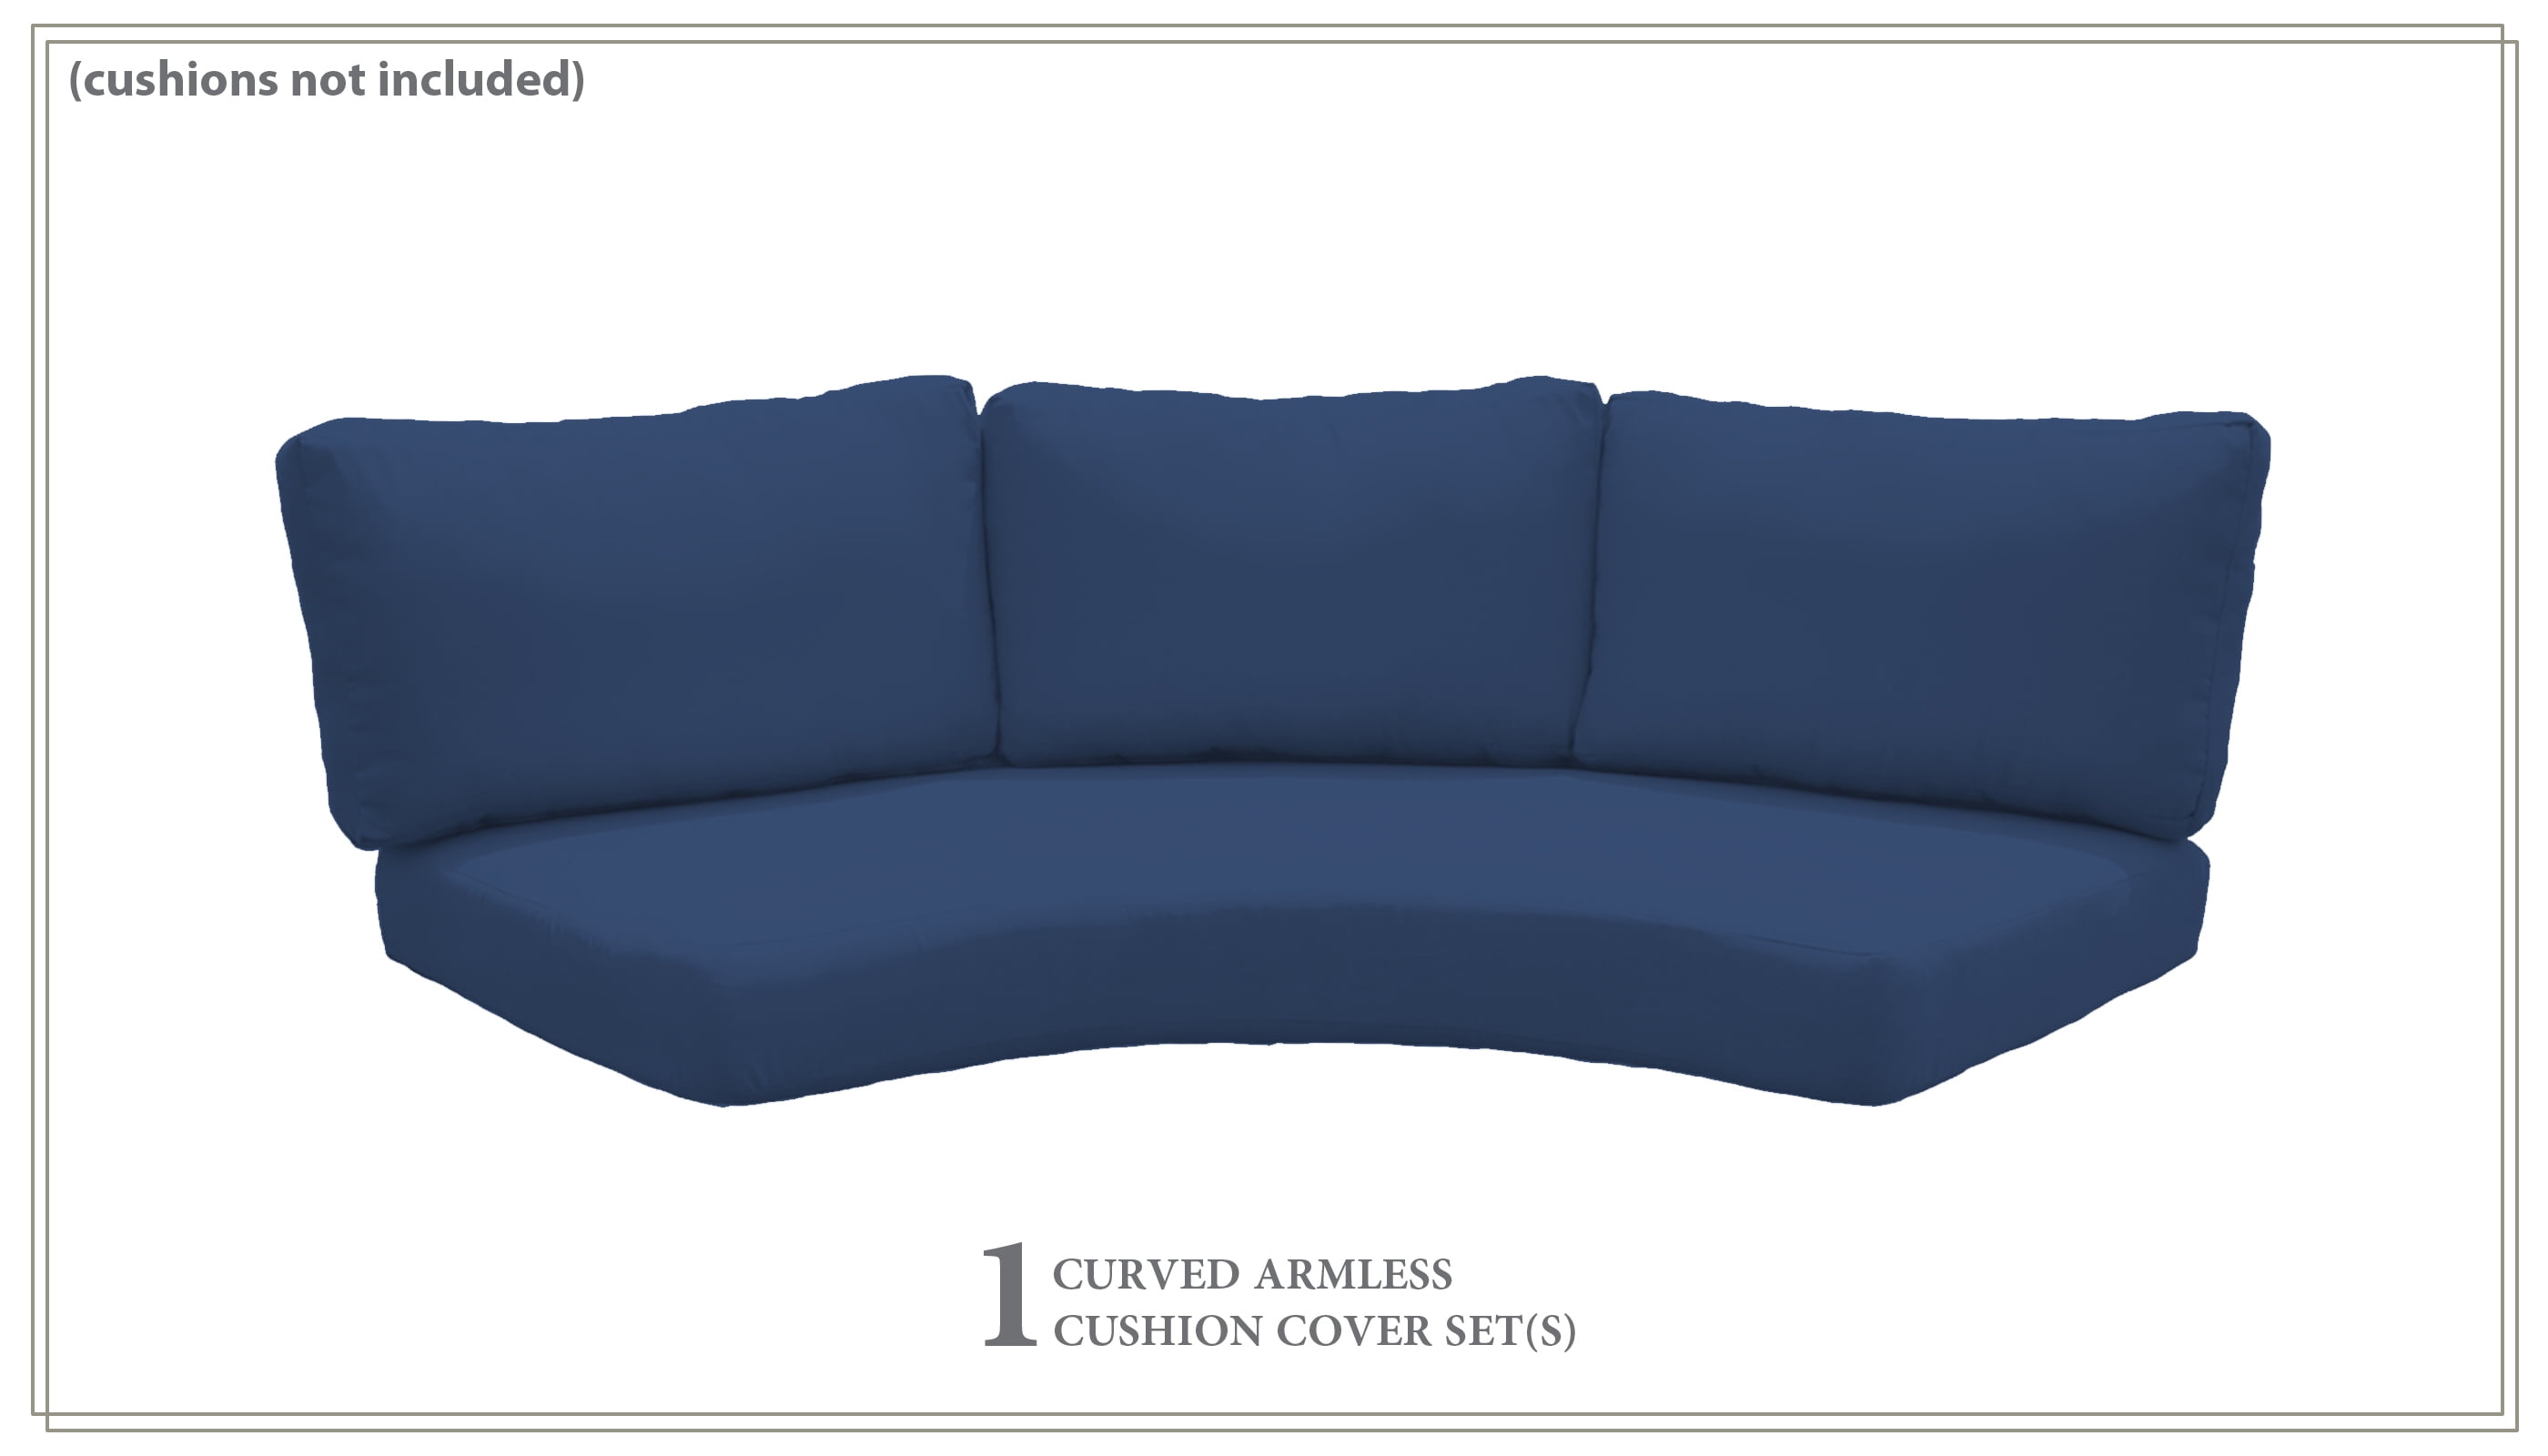 Covers for High-Back Curved Armless Sofa Cushions 6 inches thick-Color